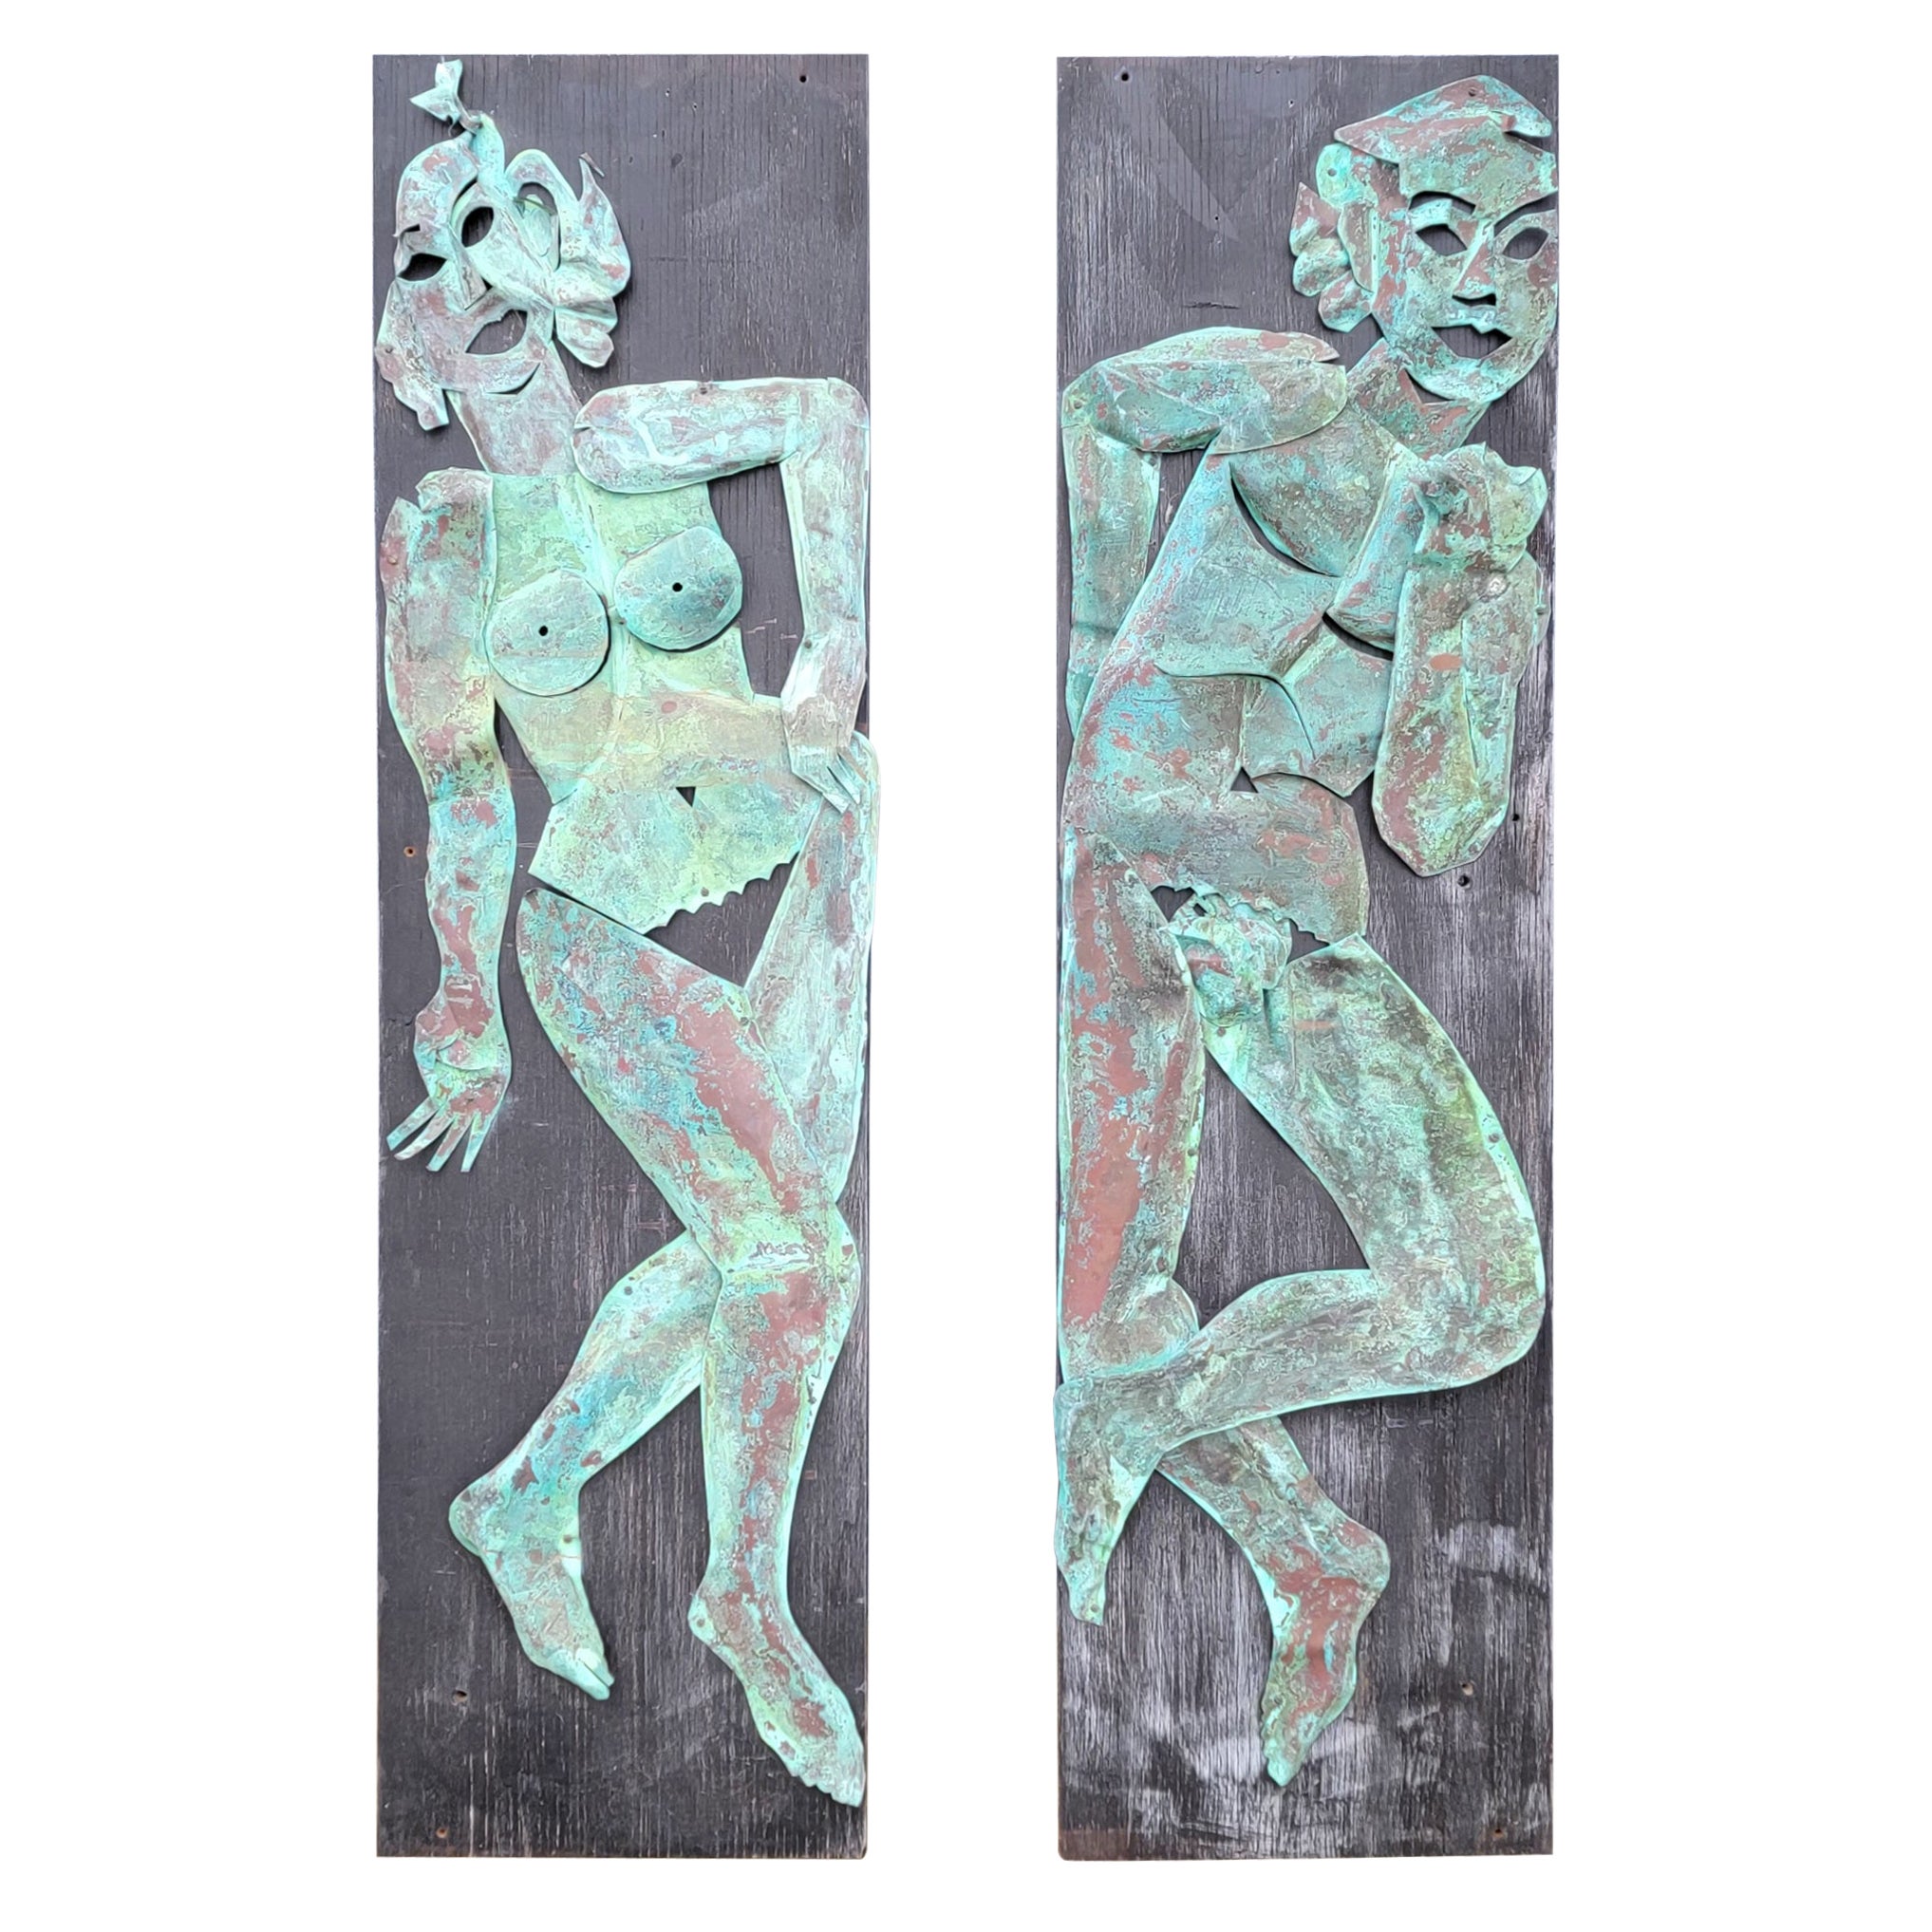 Copper Wall Art Sculpture Nude Figures Male & Female For Sale